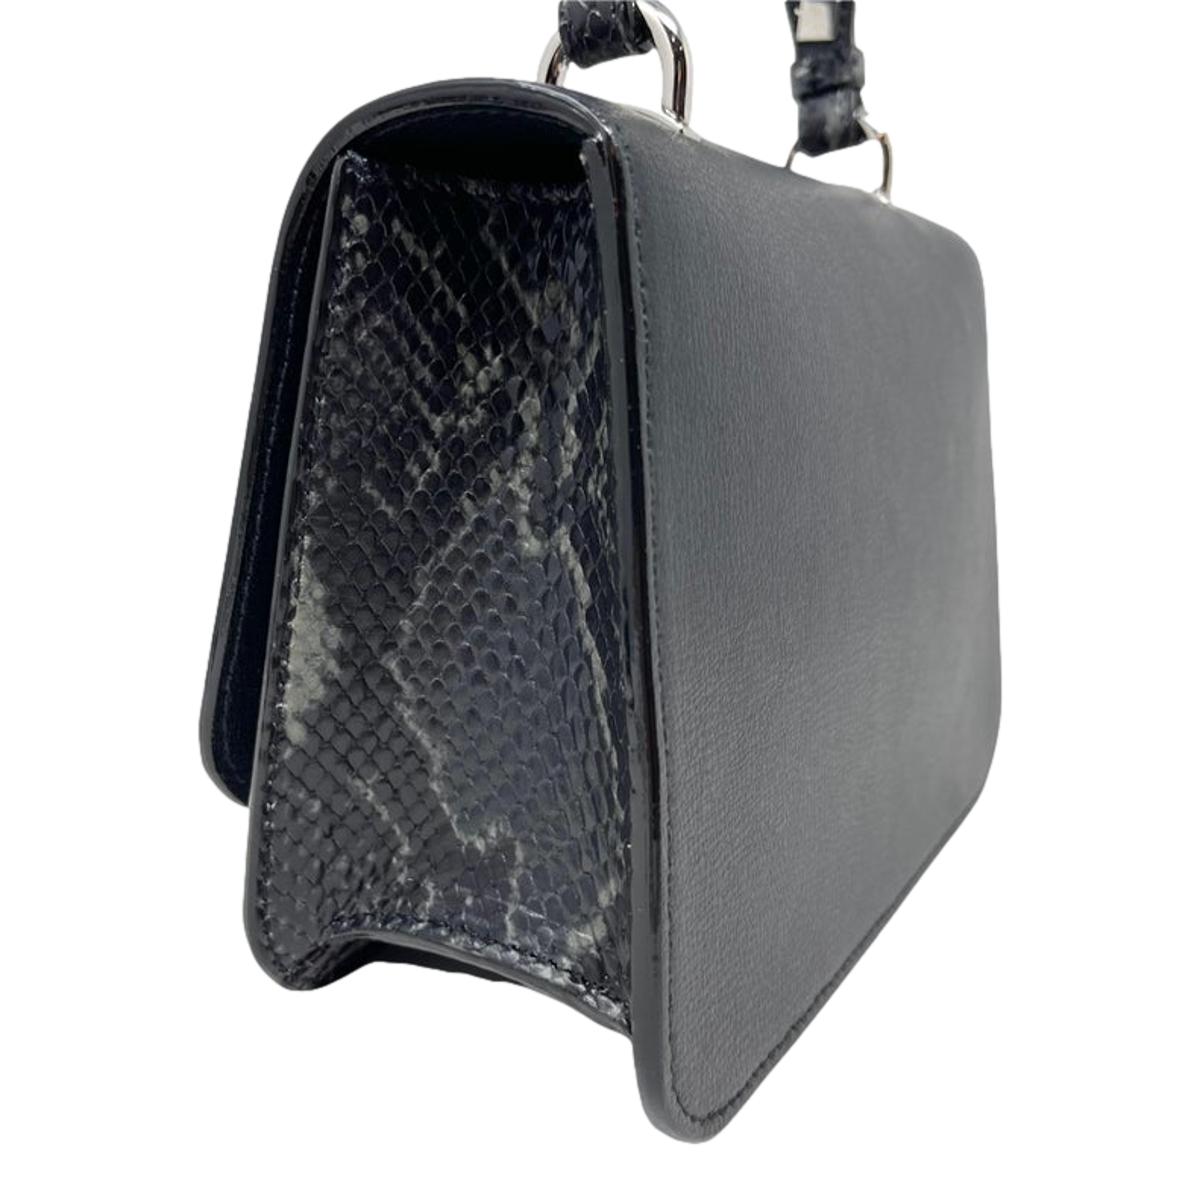 Jimmy Choo JC Anthracite Grain and Snake Print Leather Top Handle Bag OGLF | 028 at_Queen_Bee_of_Beverly_Hills